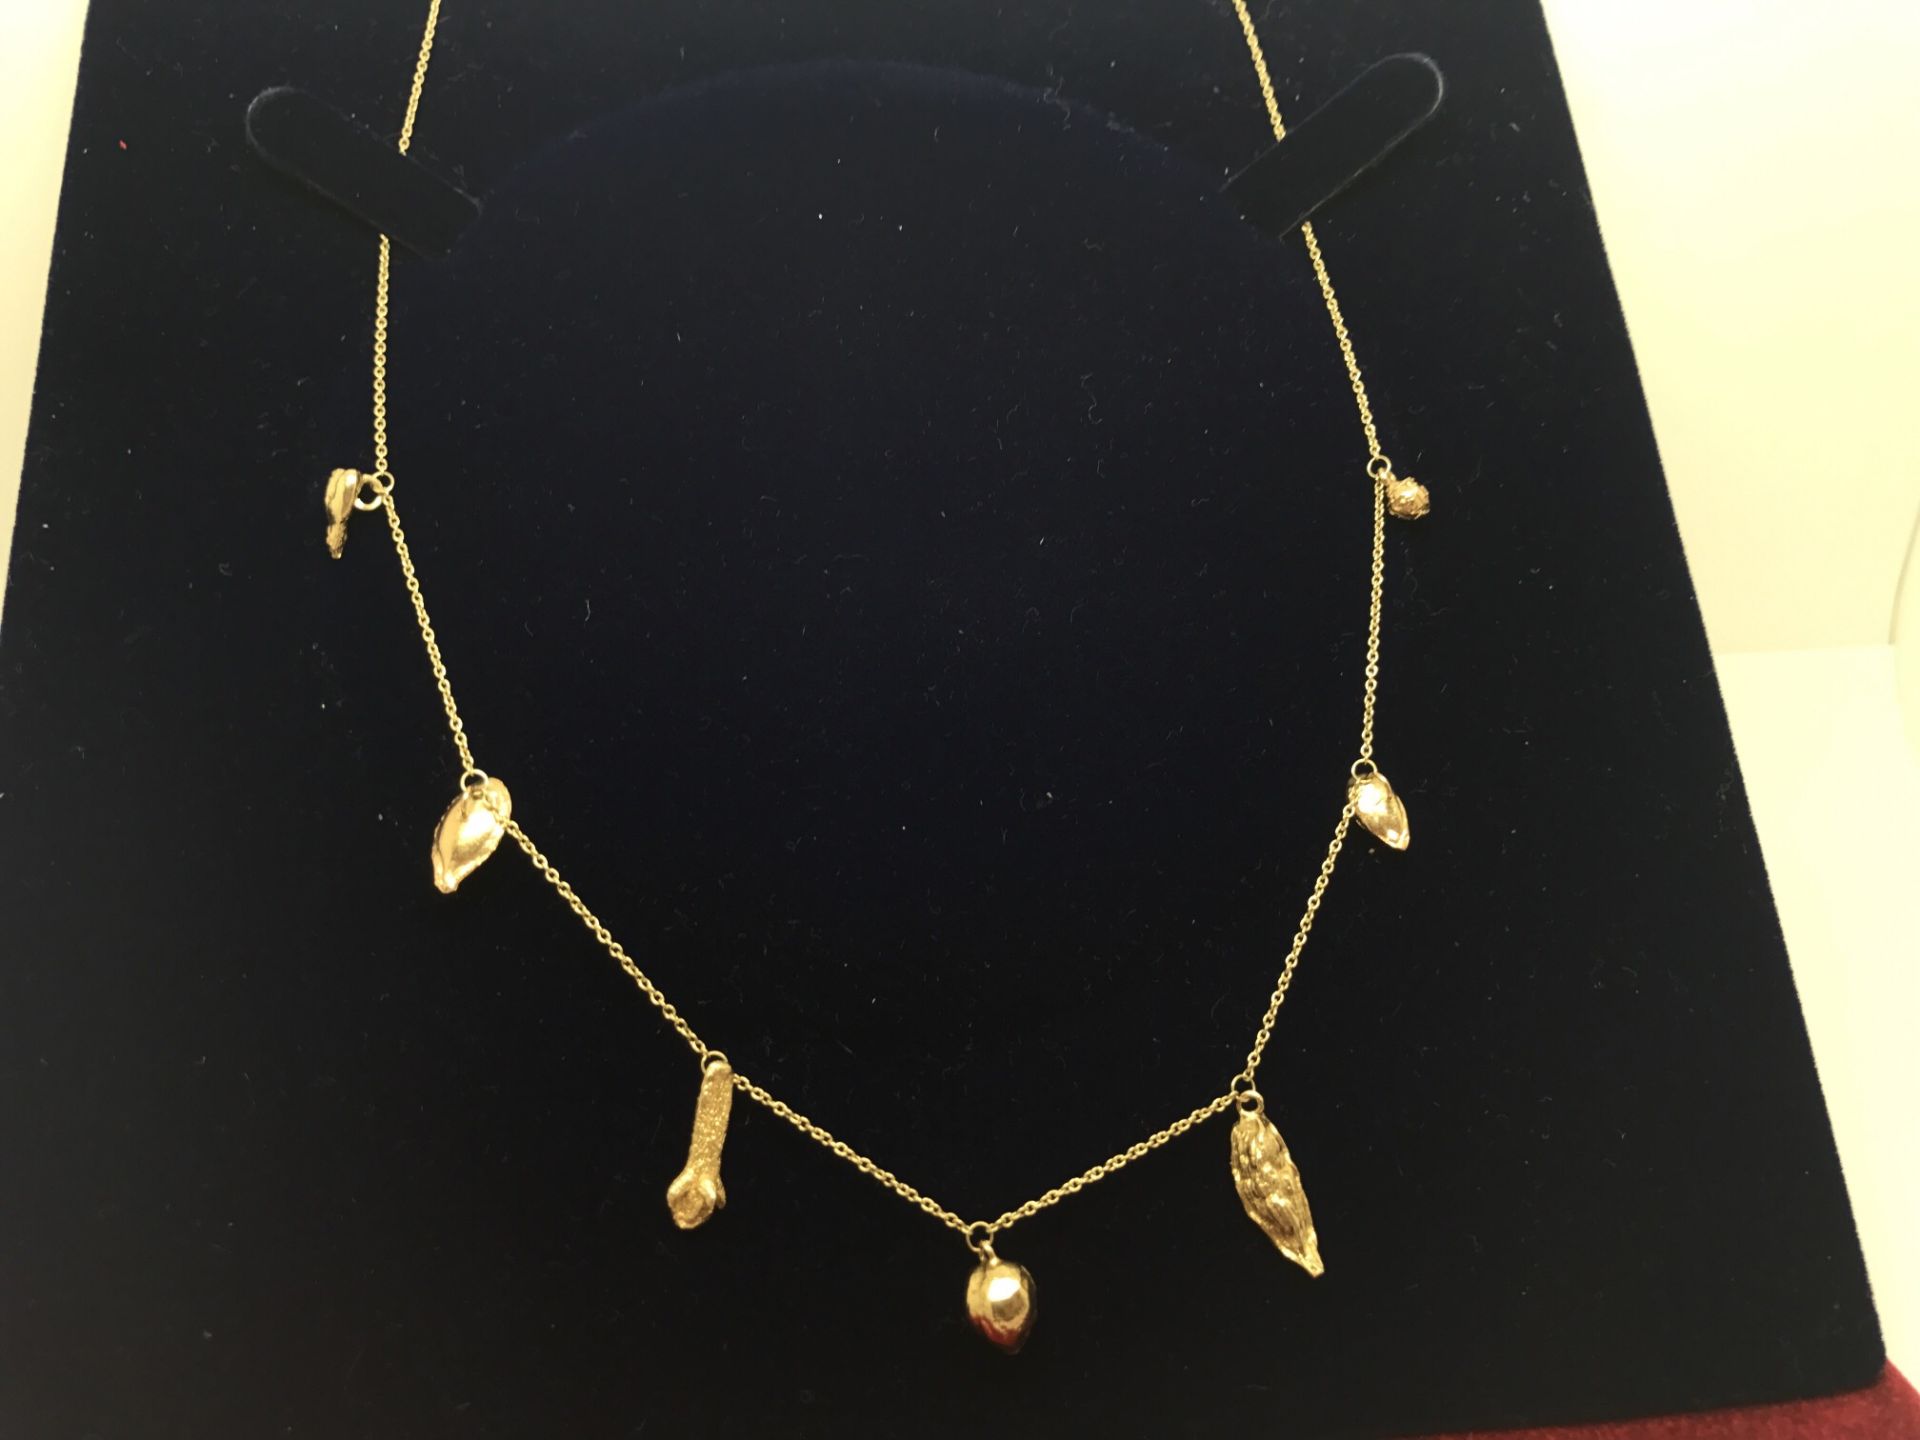 UNUSUAL 9CT GOLD CHARM STYLE NECKLACE